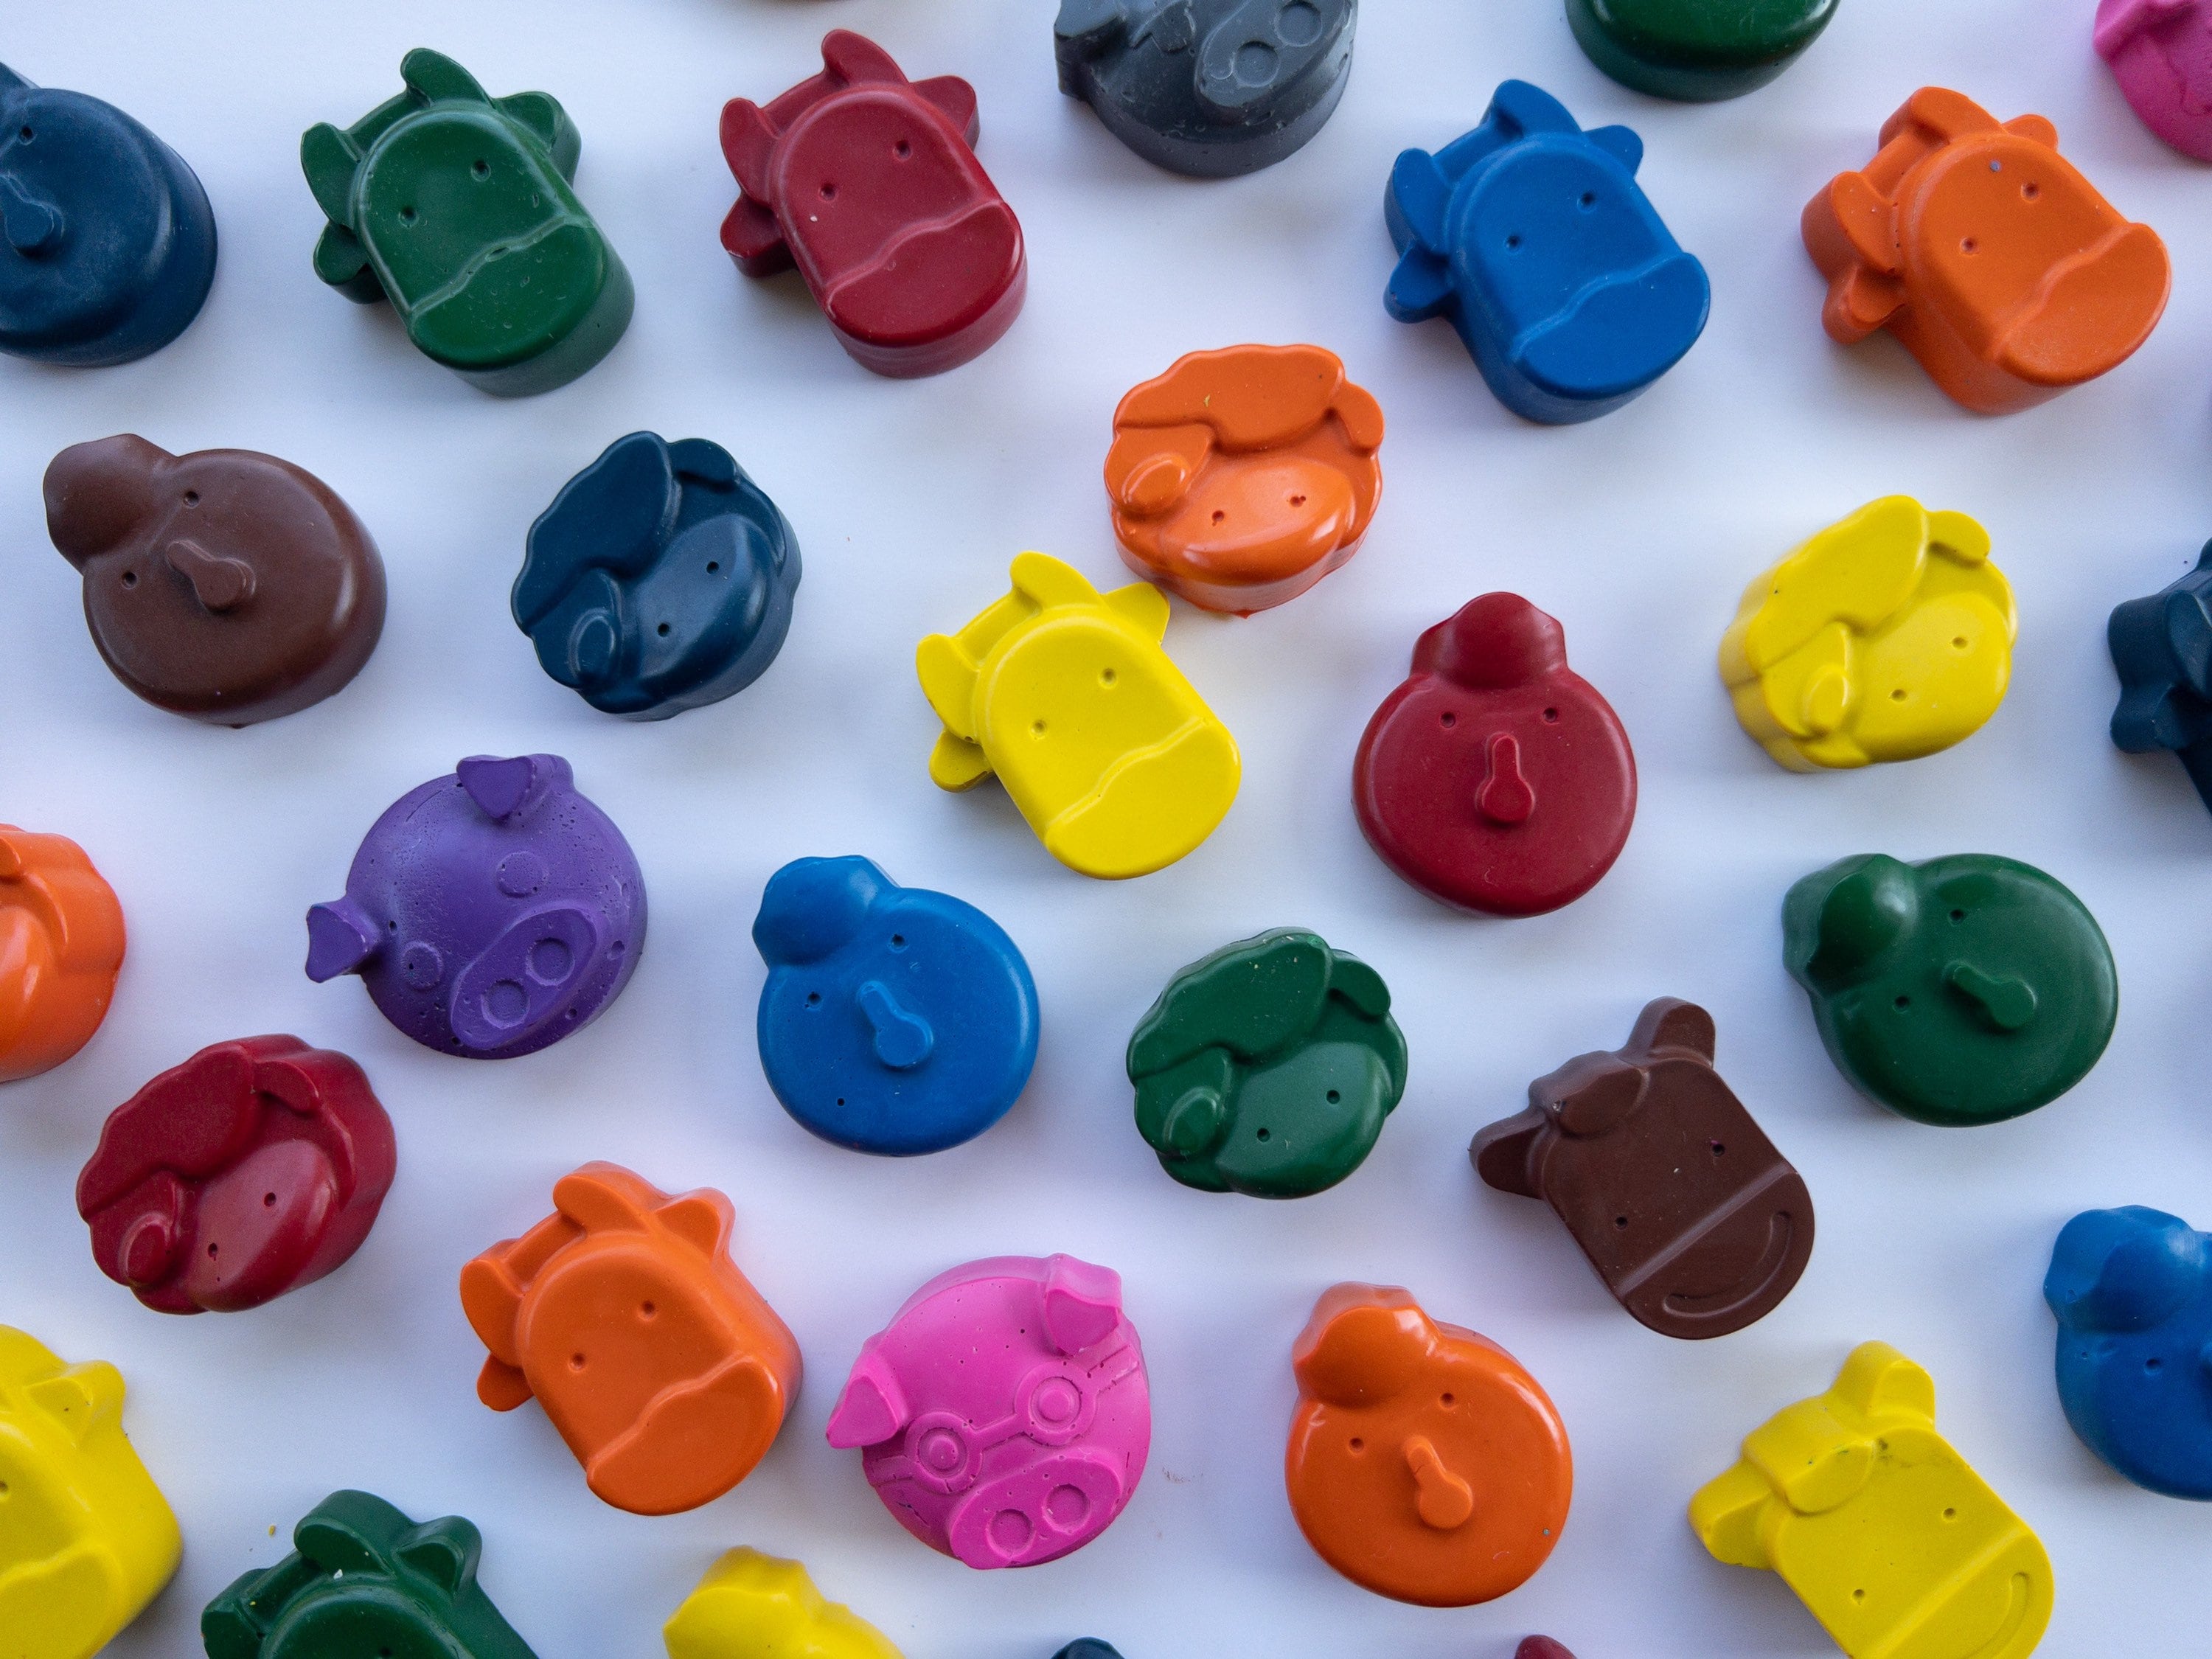 Mini PIG CRAYONS set of 7, Desk Pet/buddy for Class, Cute Gift for